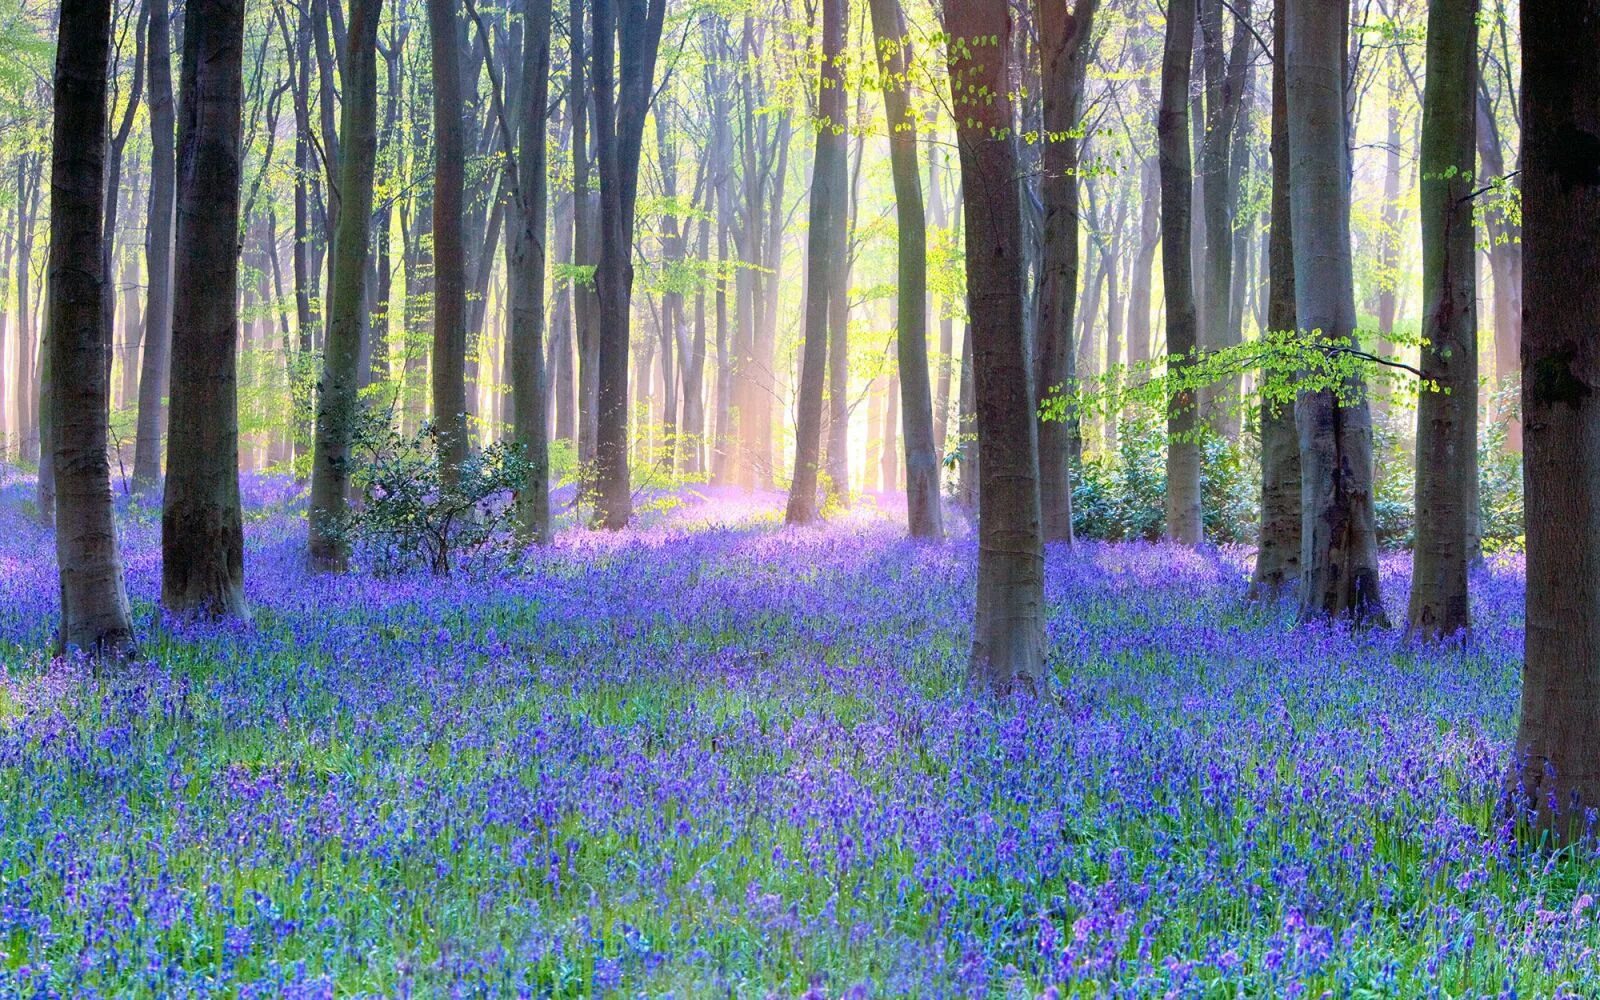 Bluebell Vision Doug Chinnery. Bluebell Forest место. Цветы Лаванда лес. Kinclave Bluebell Woods.